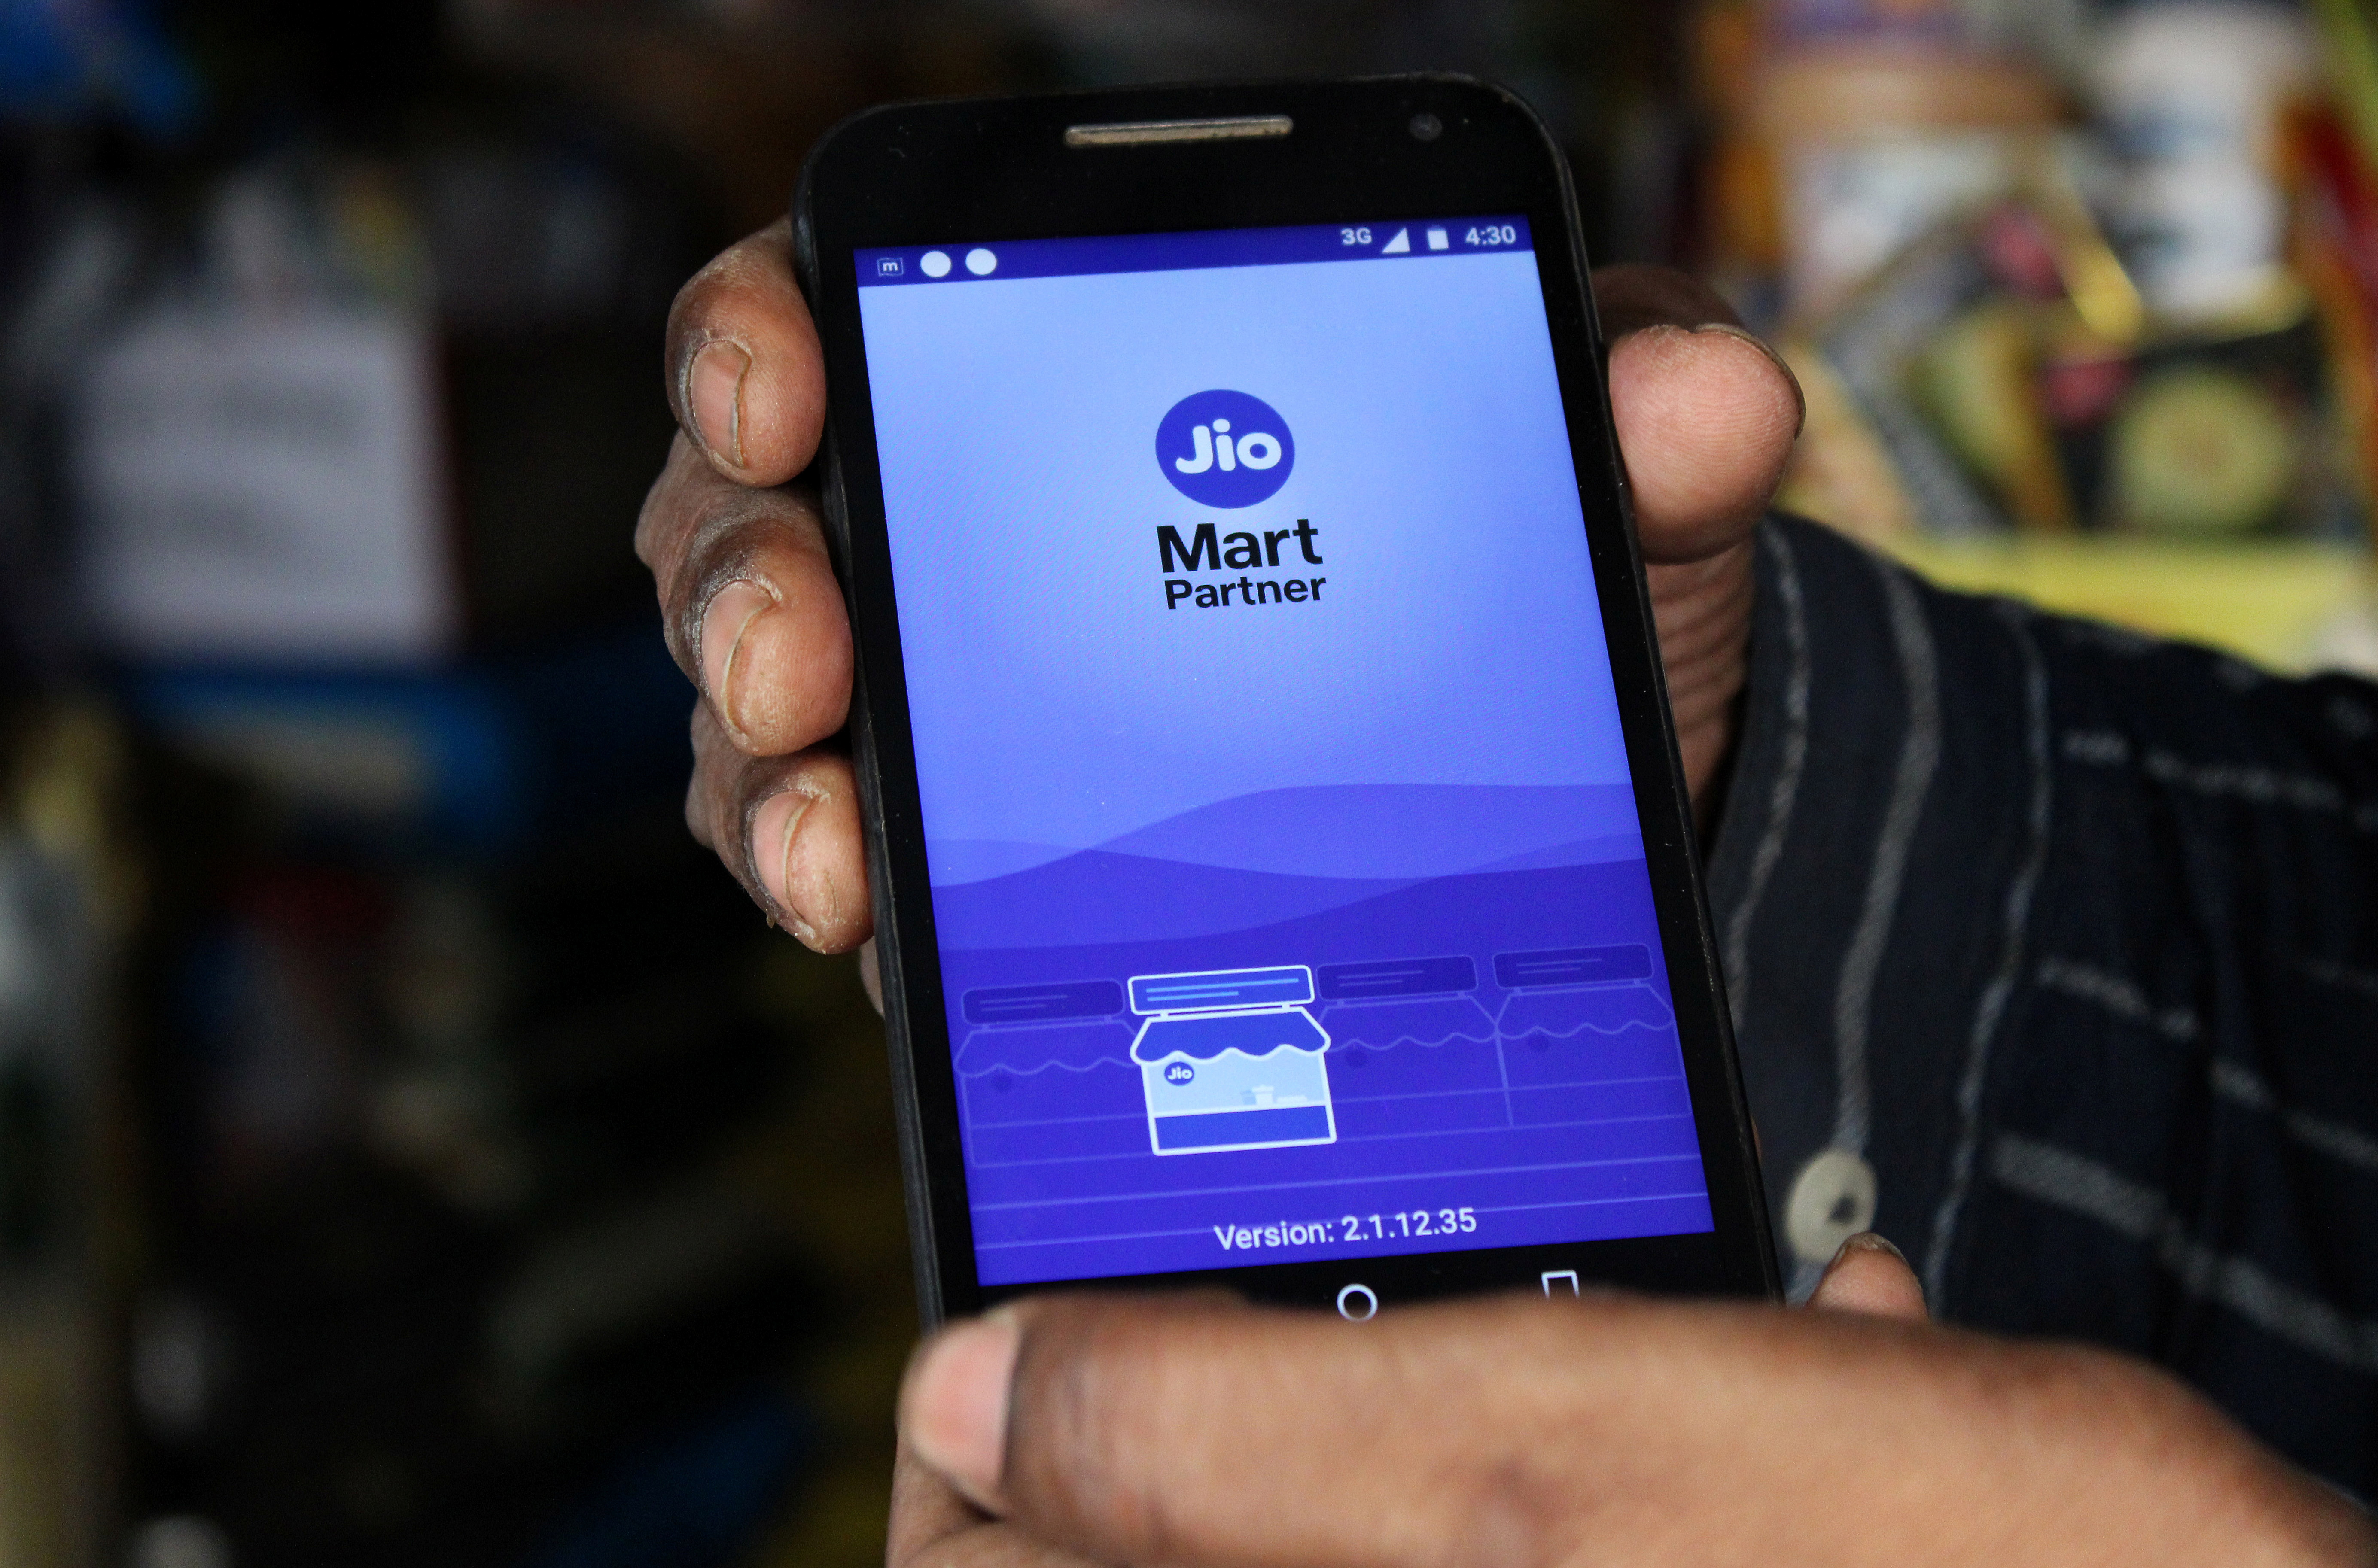 A shopkeeper selling consumer goods shows Reliance's JioMart Partner app on his mobile phone that he uses to order supplies for his store in Sangli, in the western state of Maharashtra, India, October 21, 2021. REUTERS/Abhirup Roy